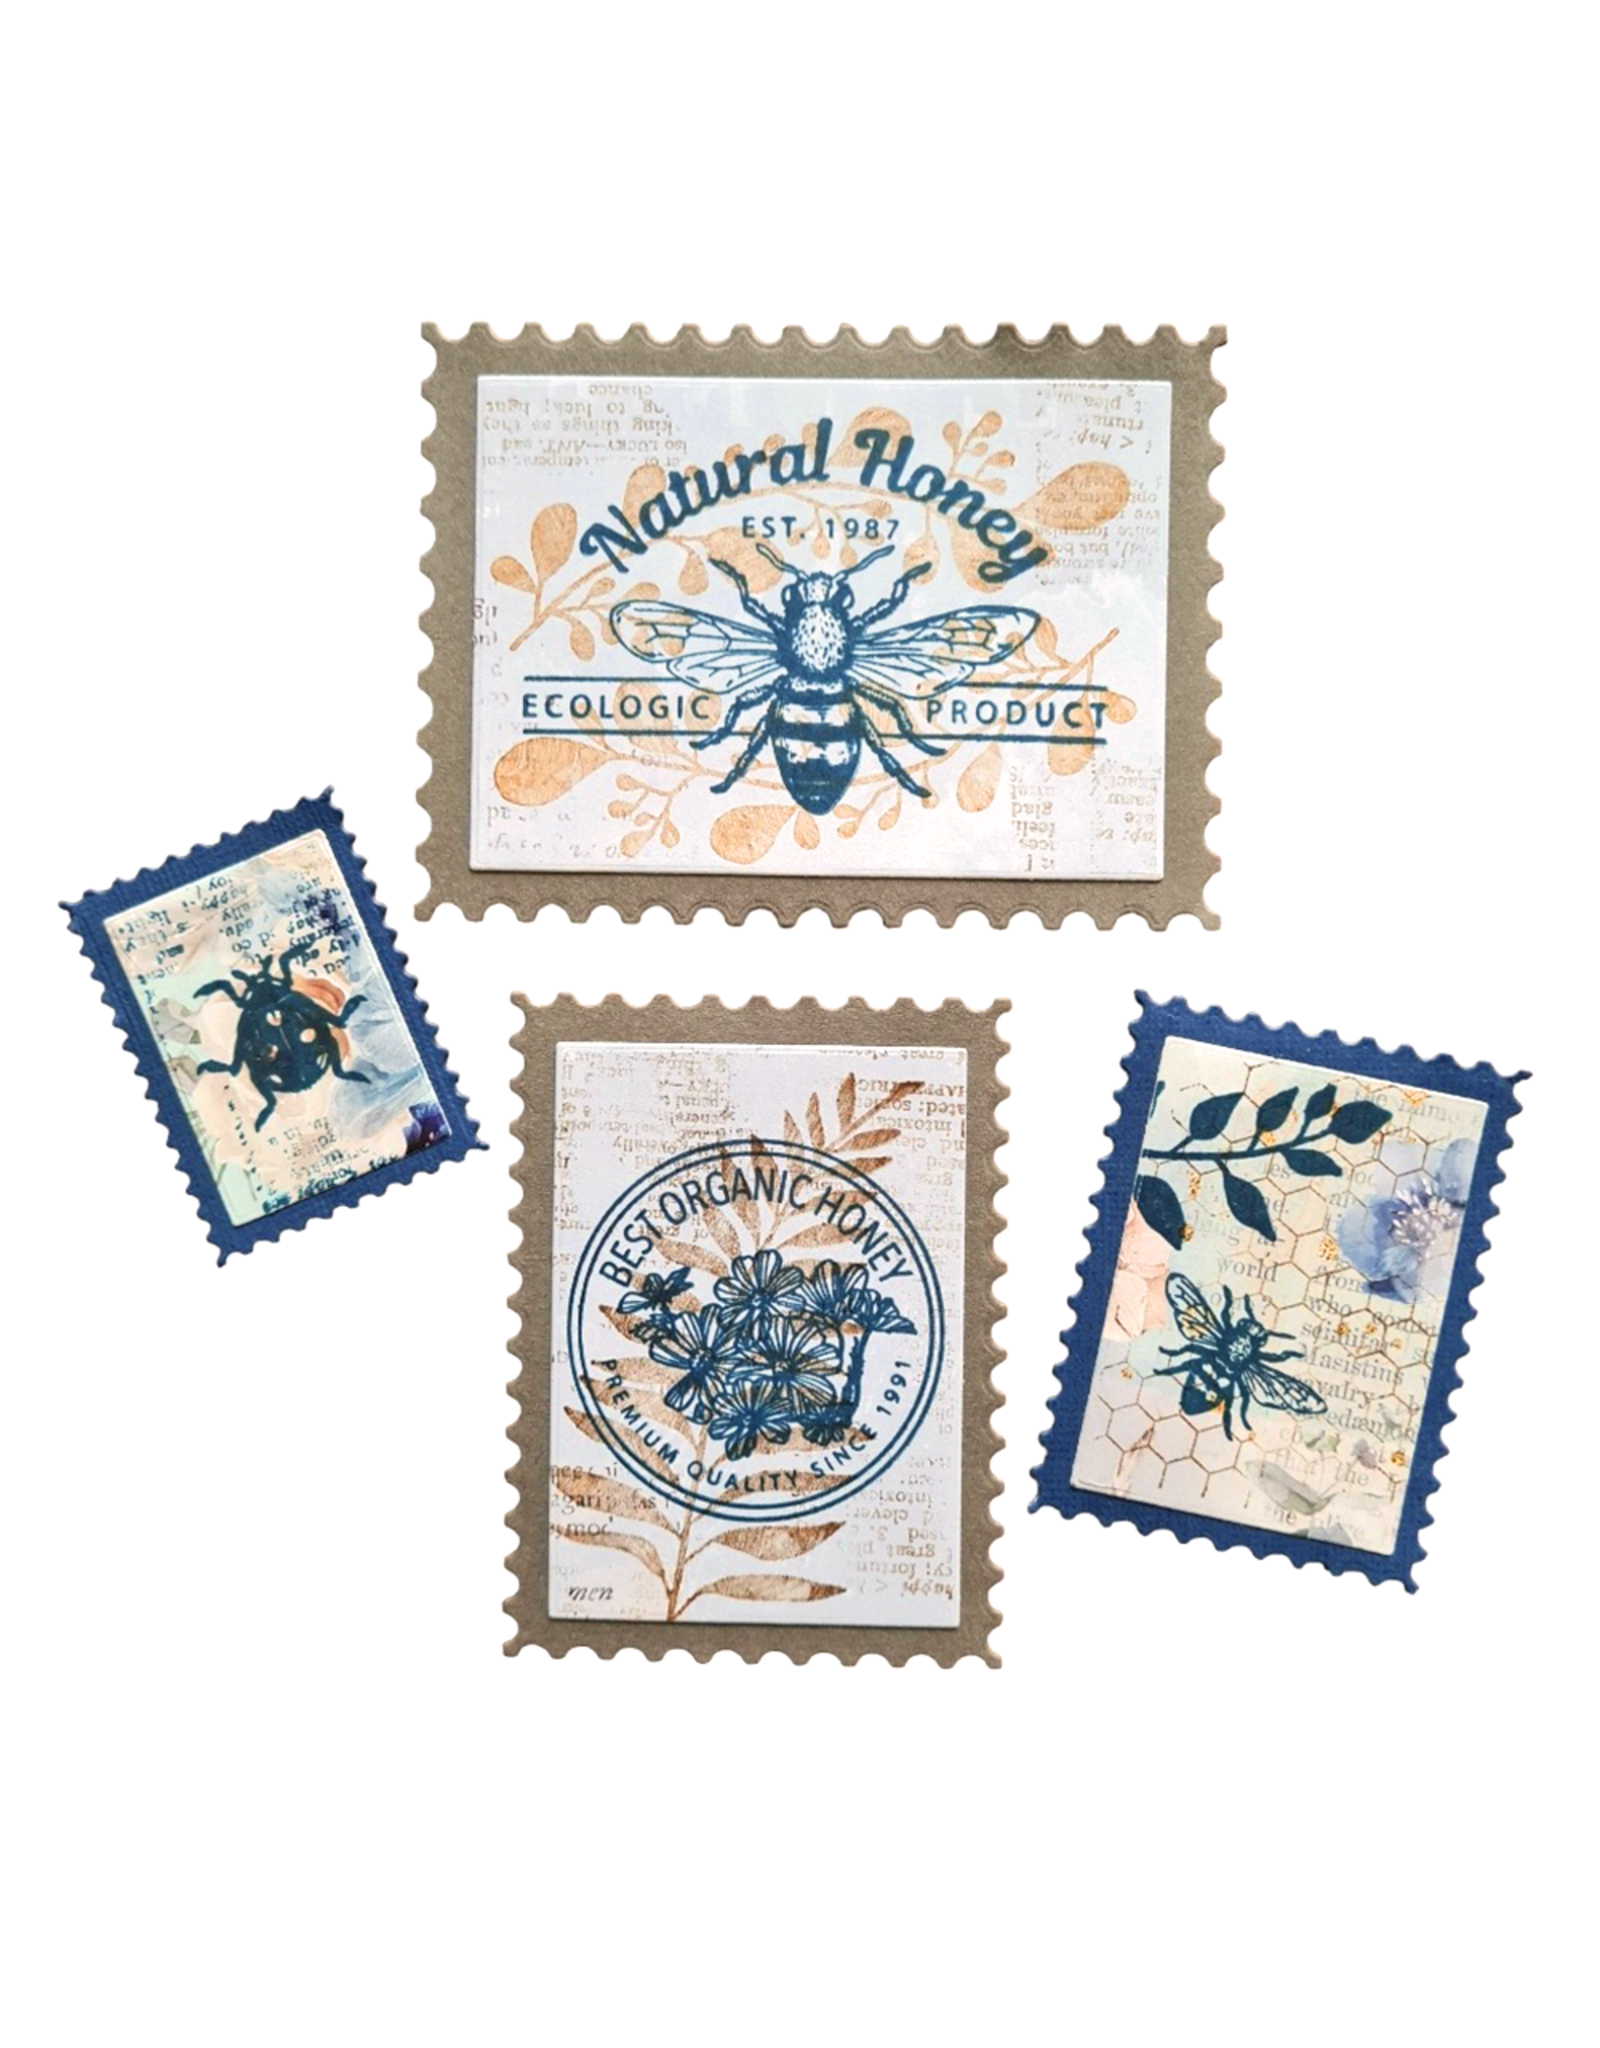 ELIZABETH CRAFT DESIGNS ELIZABETH CRAFT DESIGNS EVERYDAY ELEMENTS BY ANNETTE GREEN POSTAGE STAMPS DIE SET